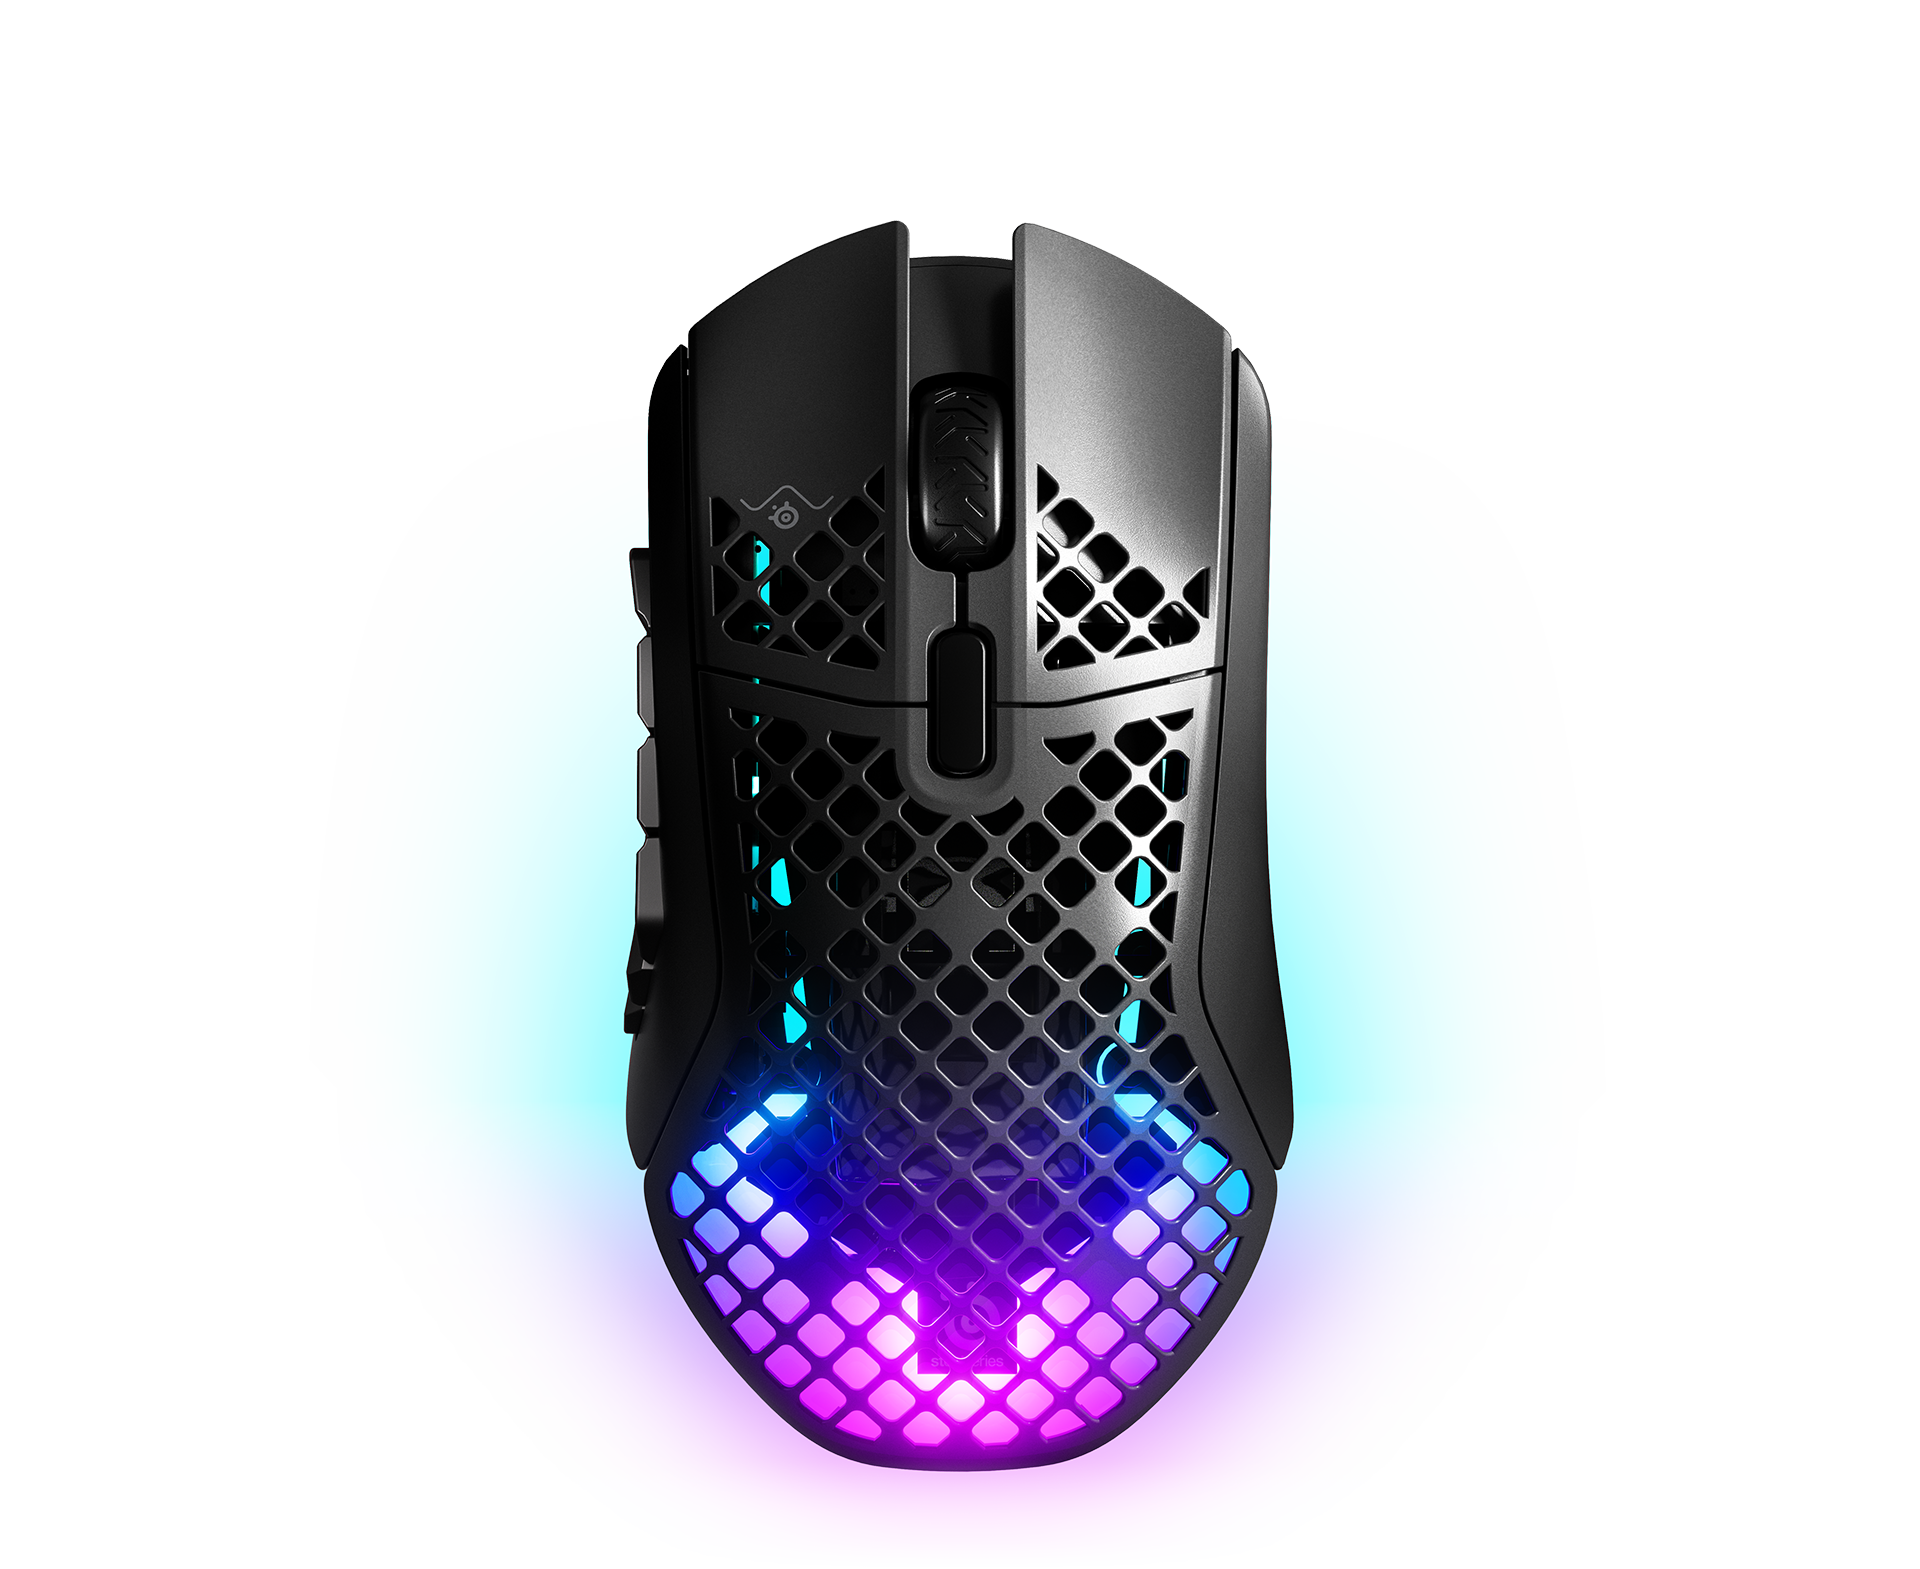 Aerox 5, Ultra lightweight mouse for multi-genre games